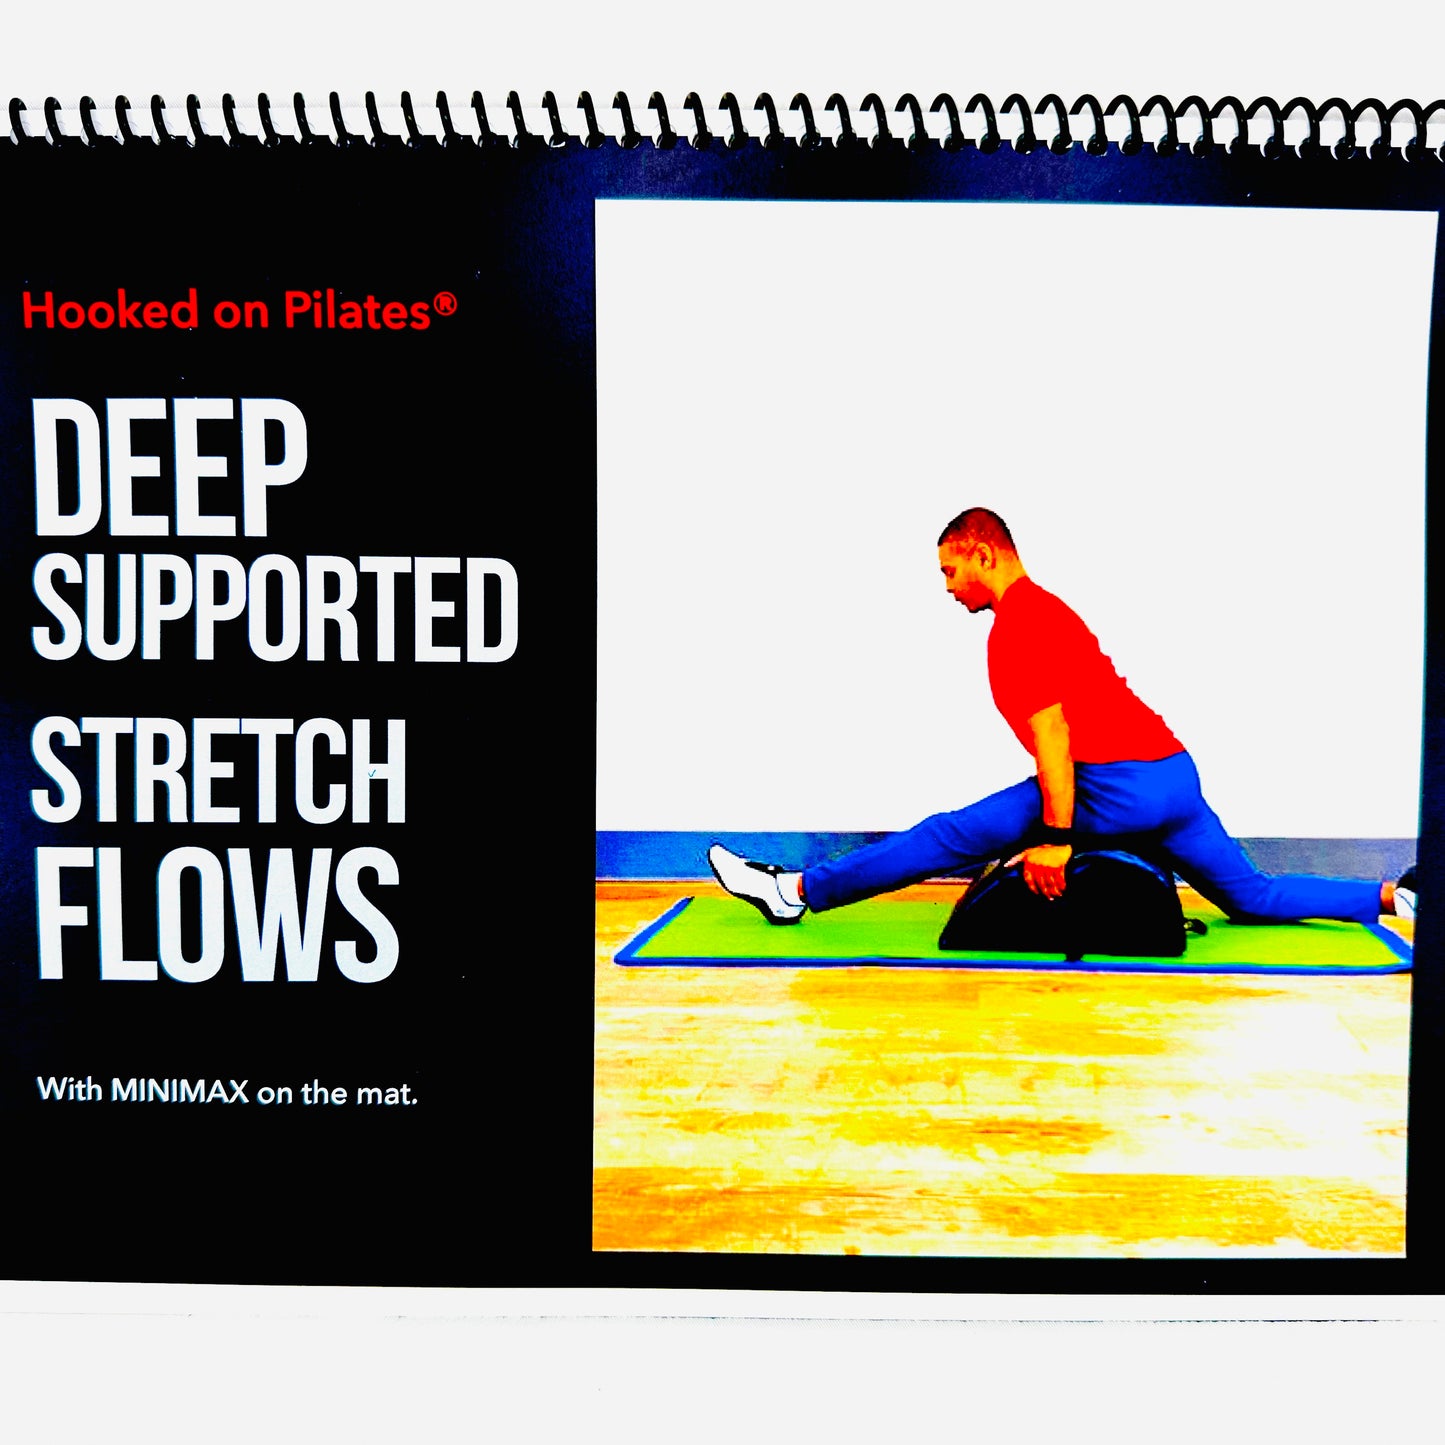 Deep Supported Stretch Flows with the Minimax (printed book)